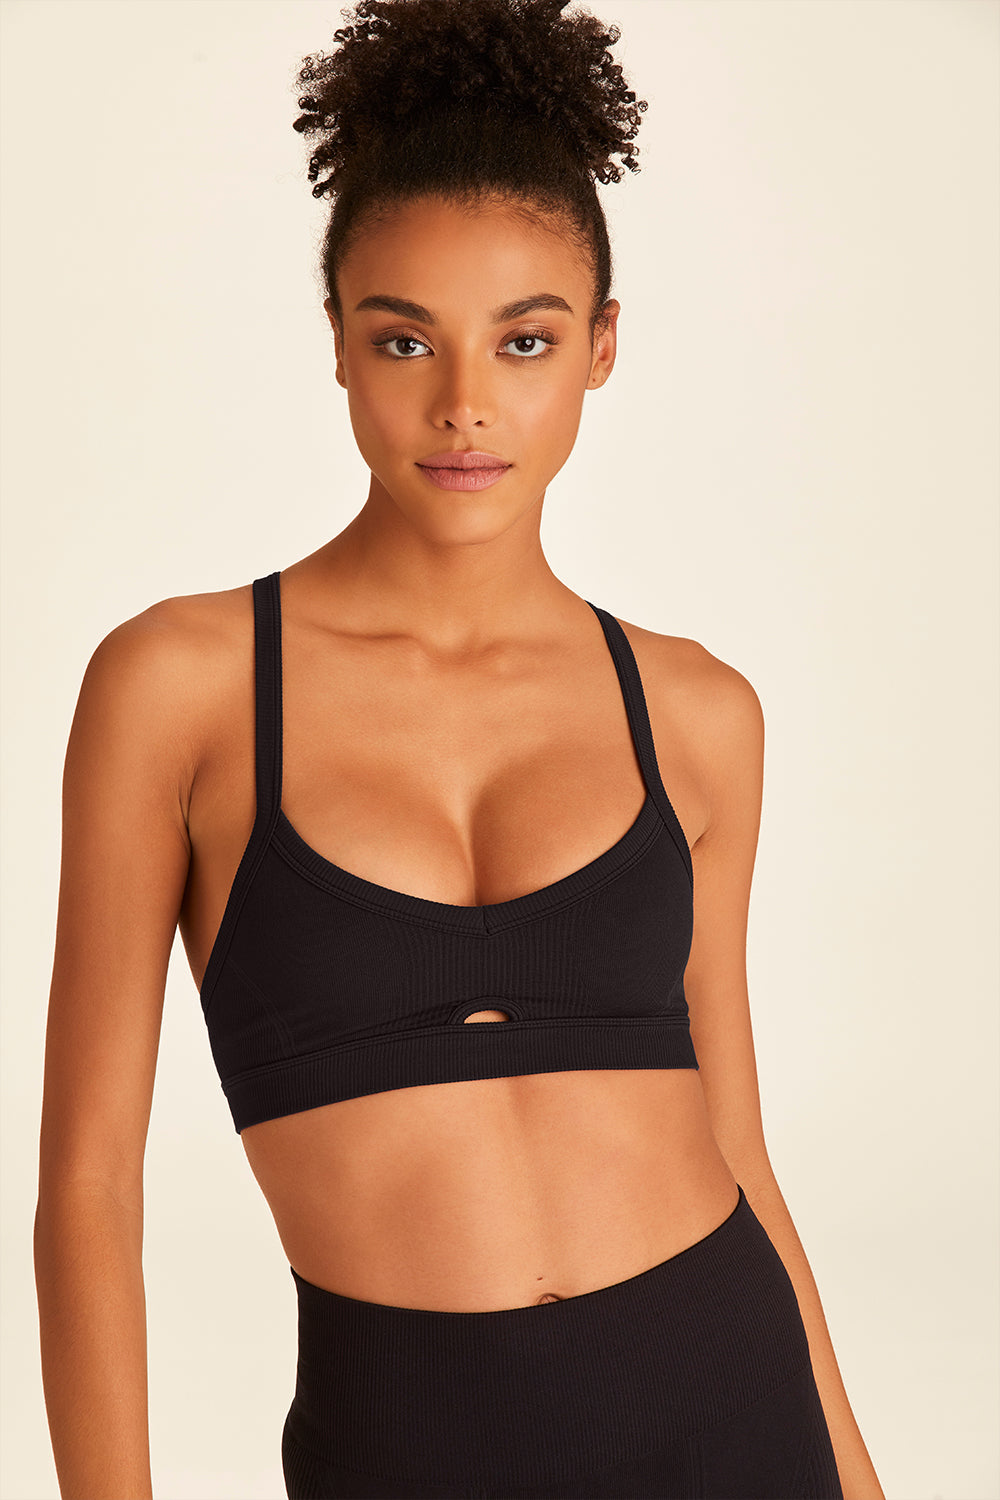 Good morning!🌞 Check out this bra try-on for fuller bust women like m